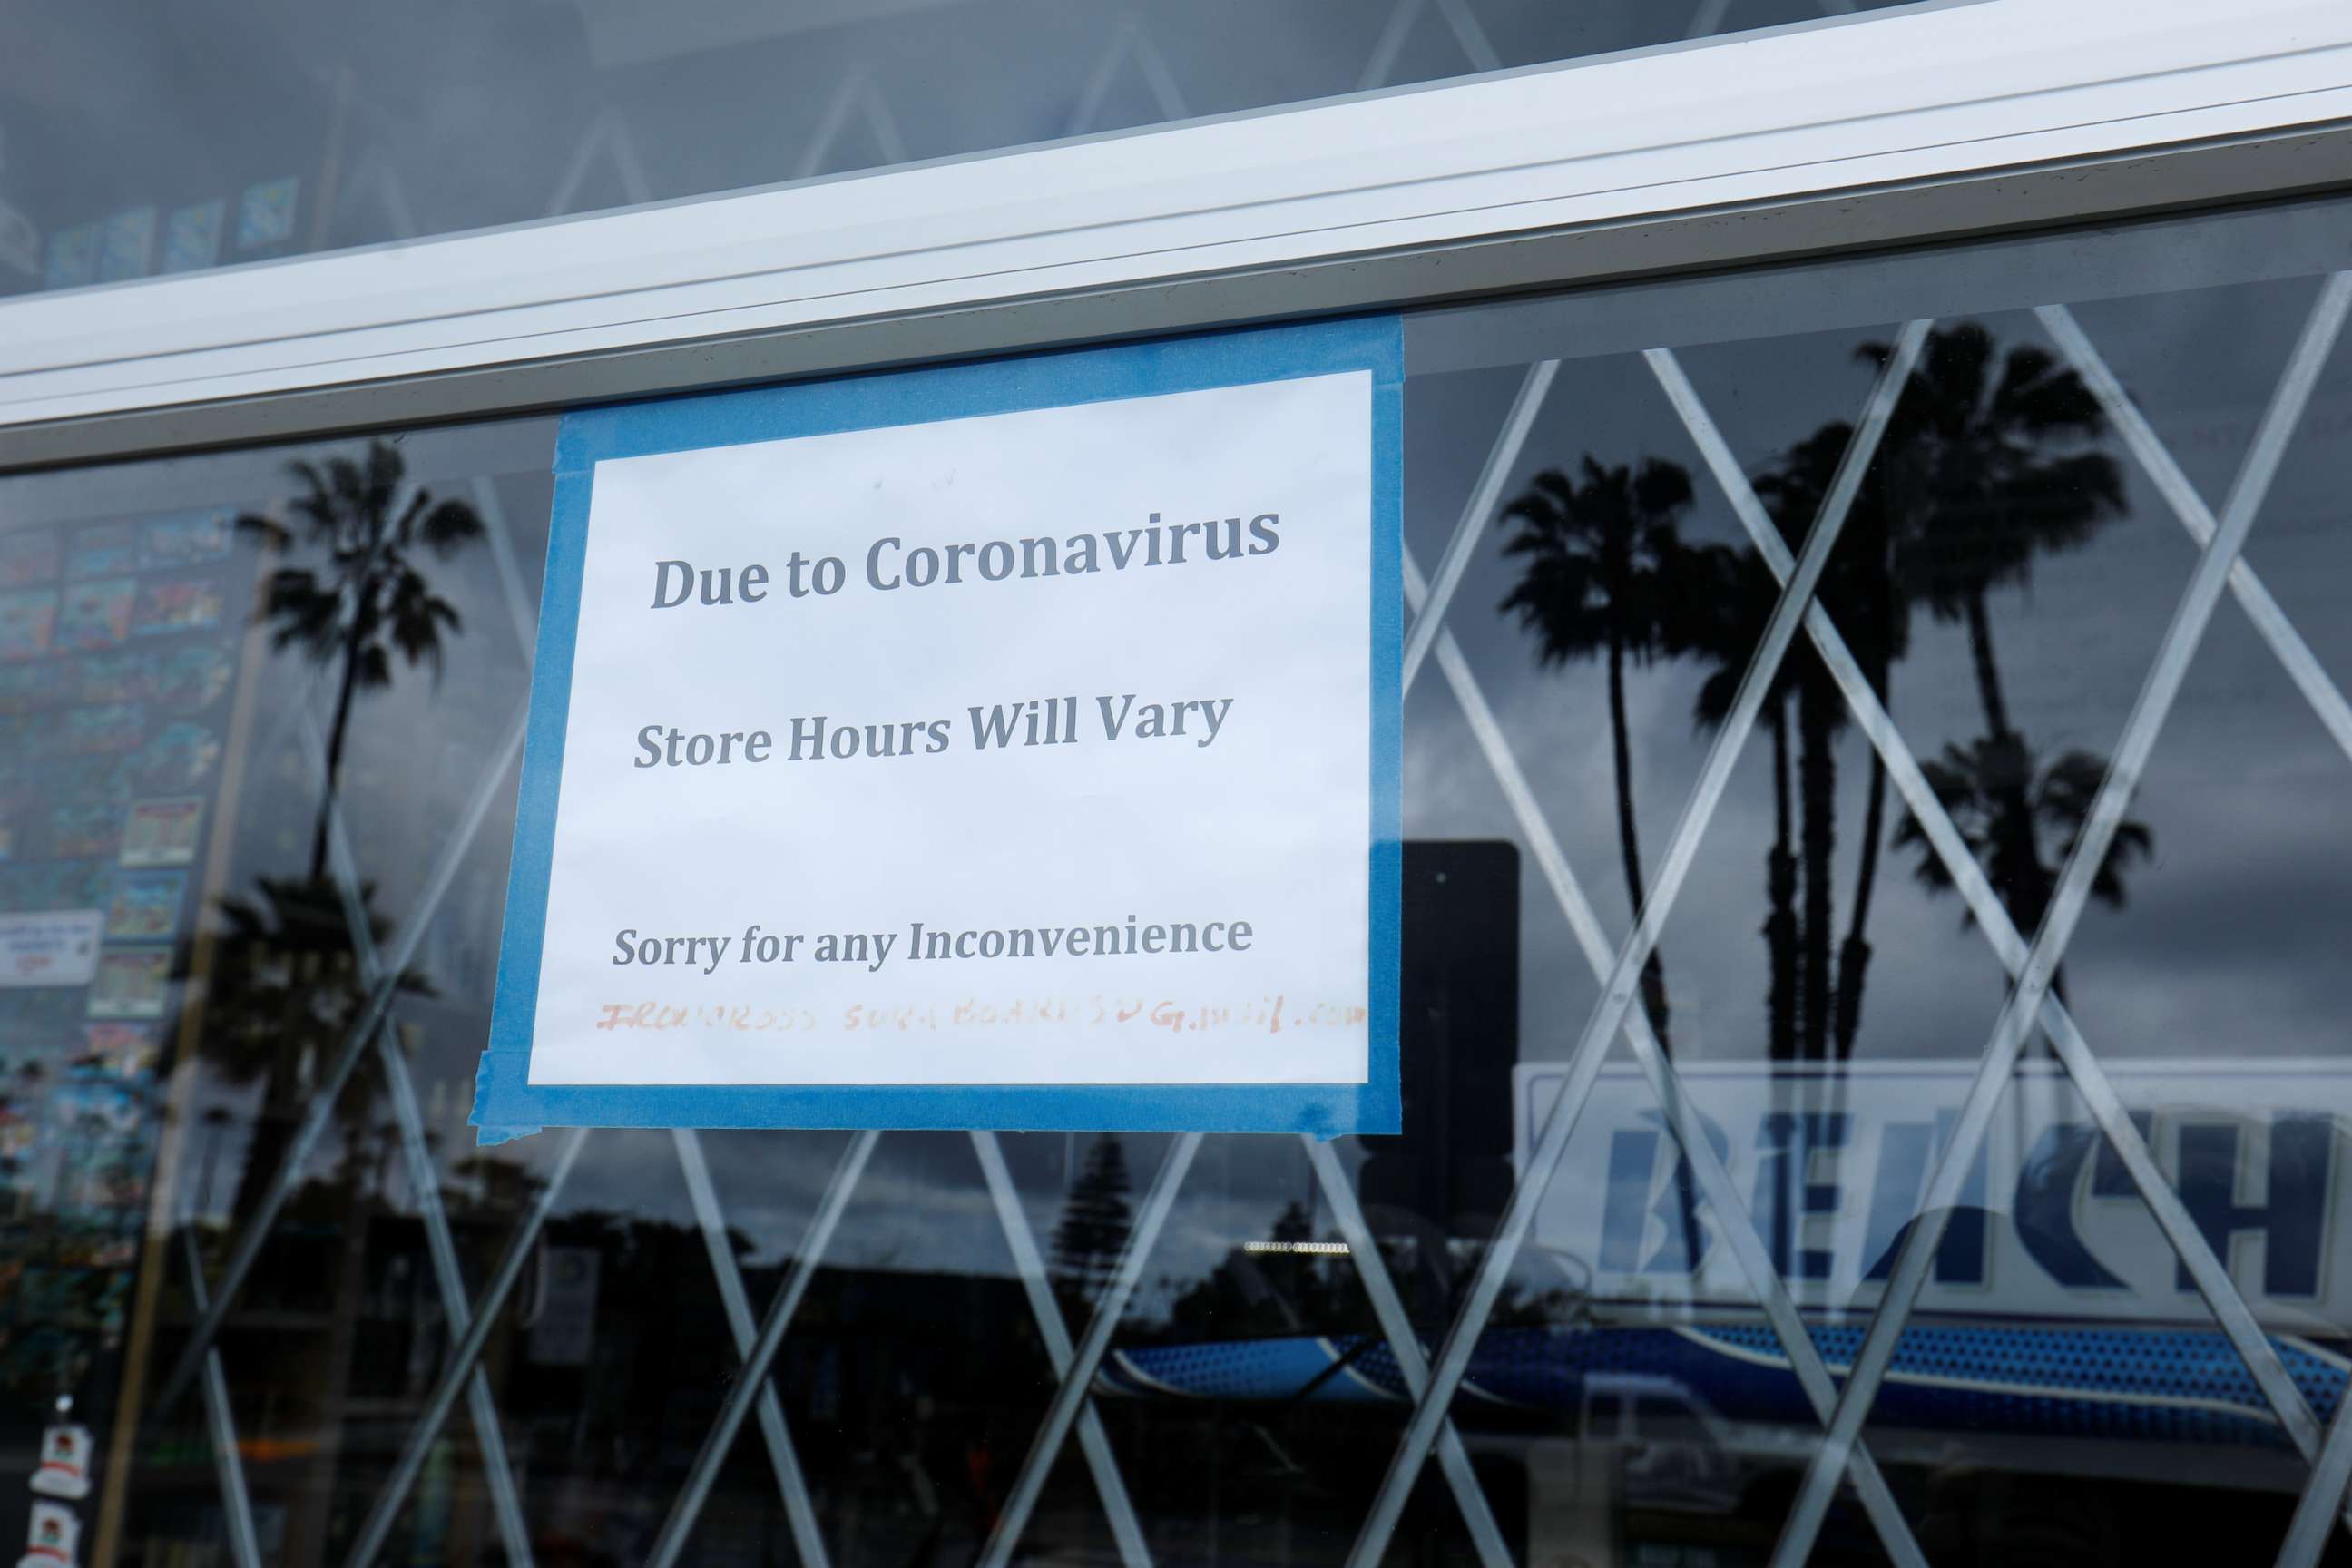 PHOTO: A closed sign is shown on the window of a beach sports store during the outbreak of the coronavirus in Encinitas, Calif., April 9, 2020.